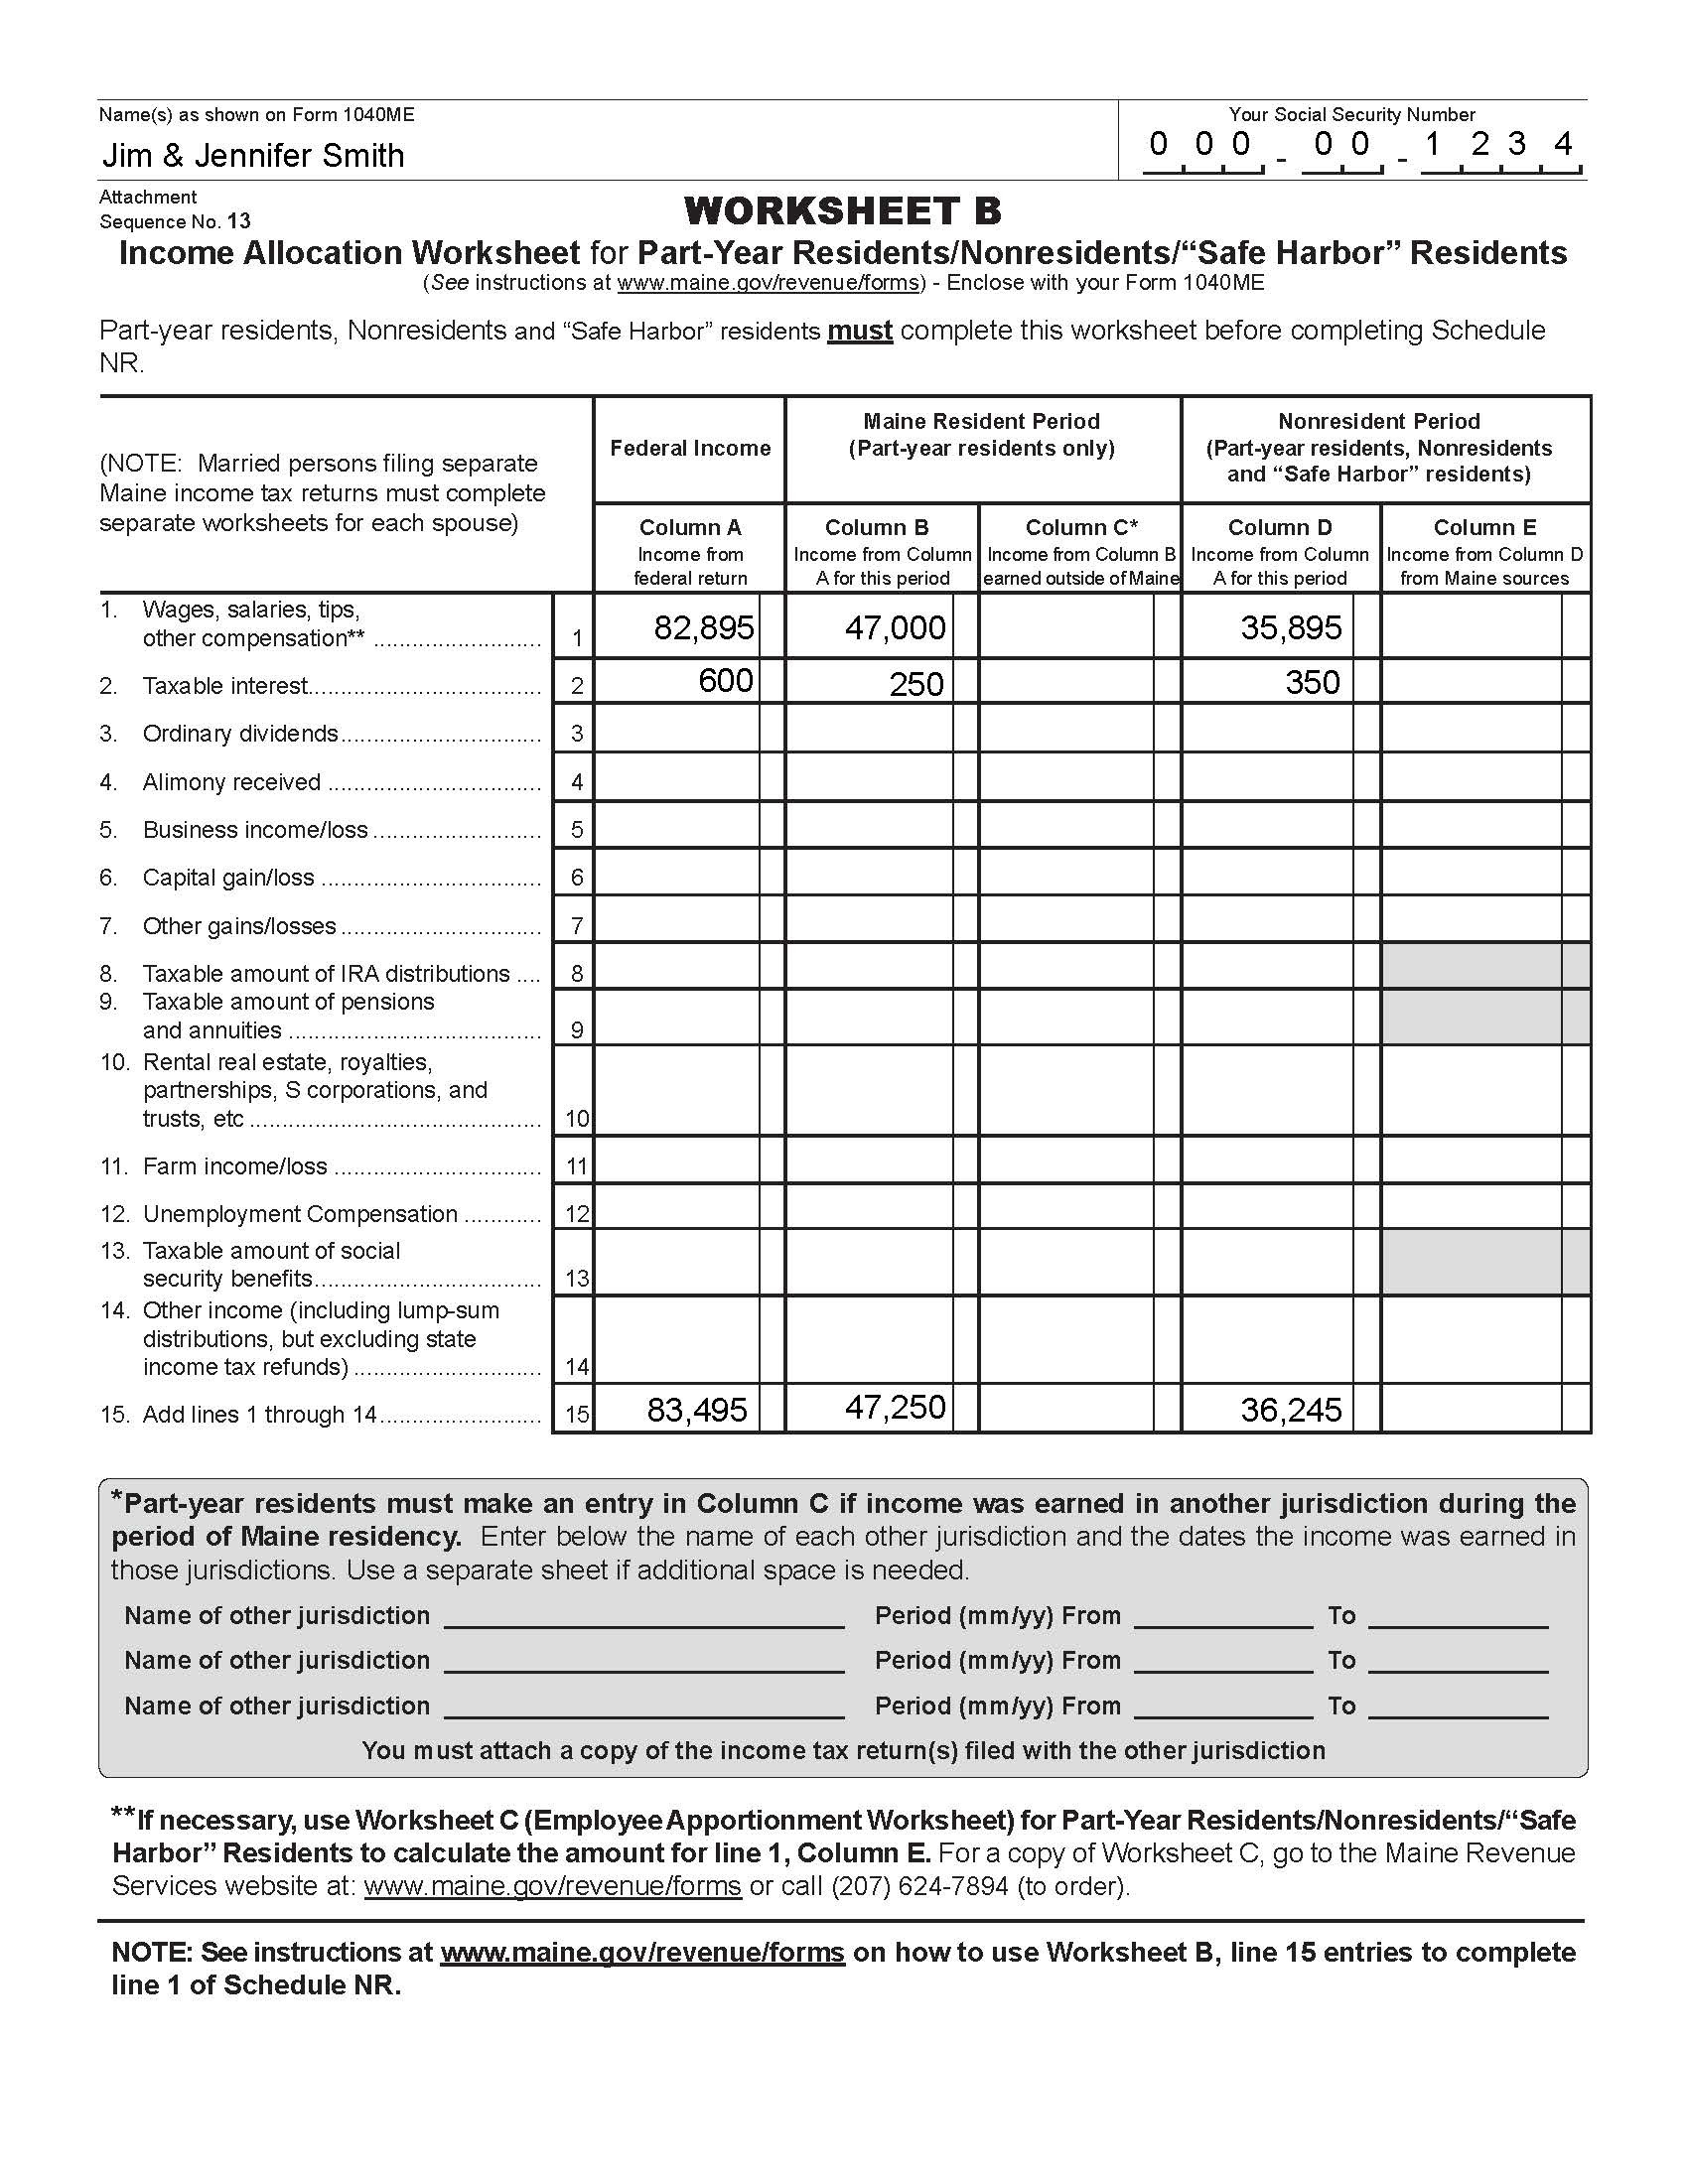 Federal Income Tax Worksheet | db-excel.com